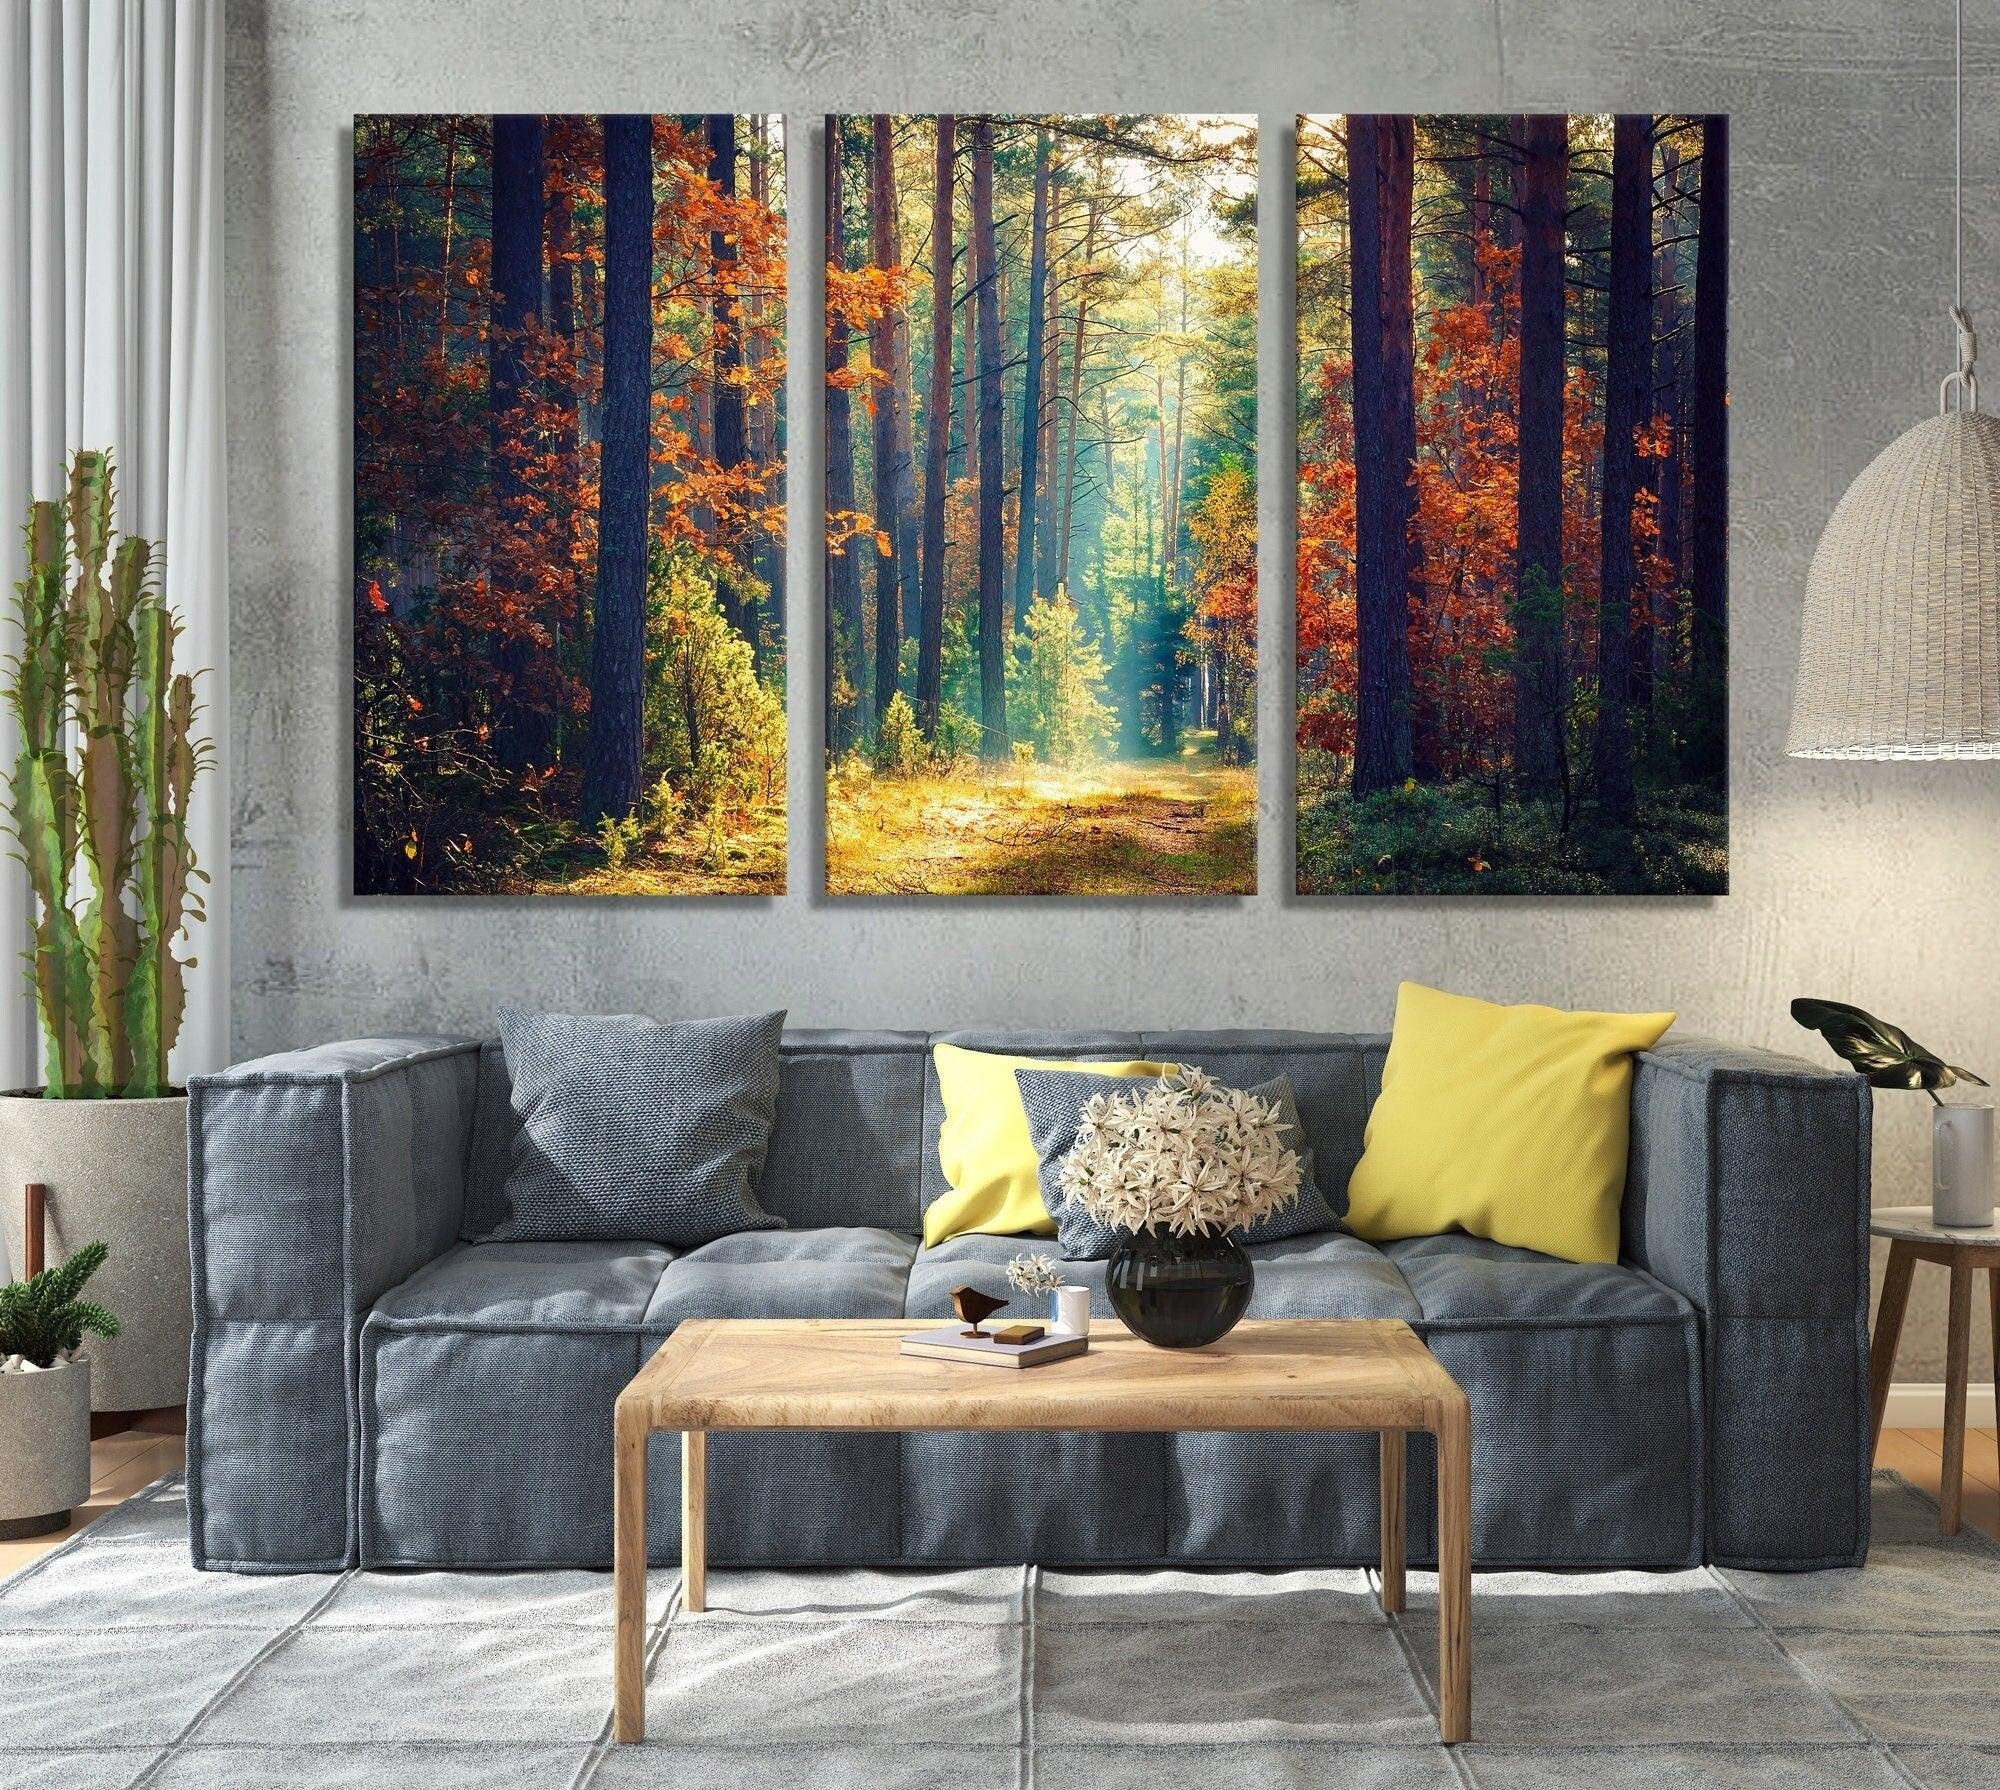 Autumn Trees Scenery canvas art | Morning Sun Rays in Colorful Forest, framed canvas, forest canvas art, autumn wall decor, large wall art